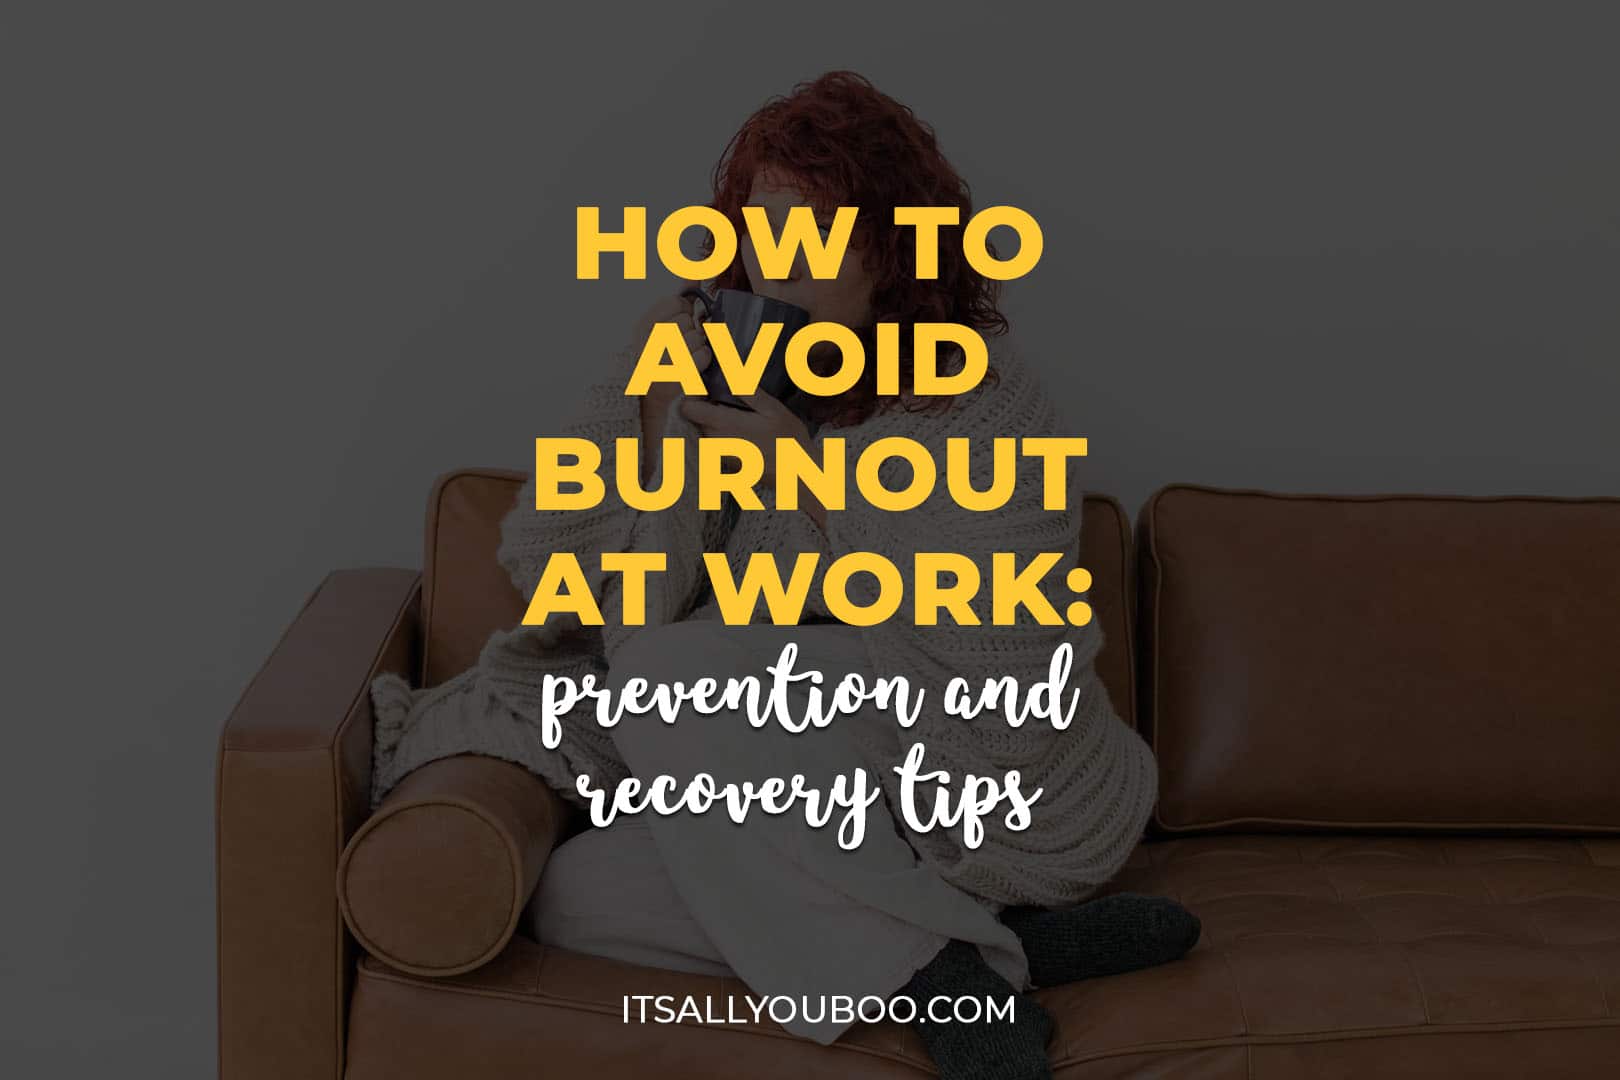 How To Avoid Burnout At Work: Prevention and Recovery Tips